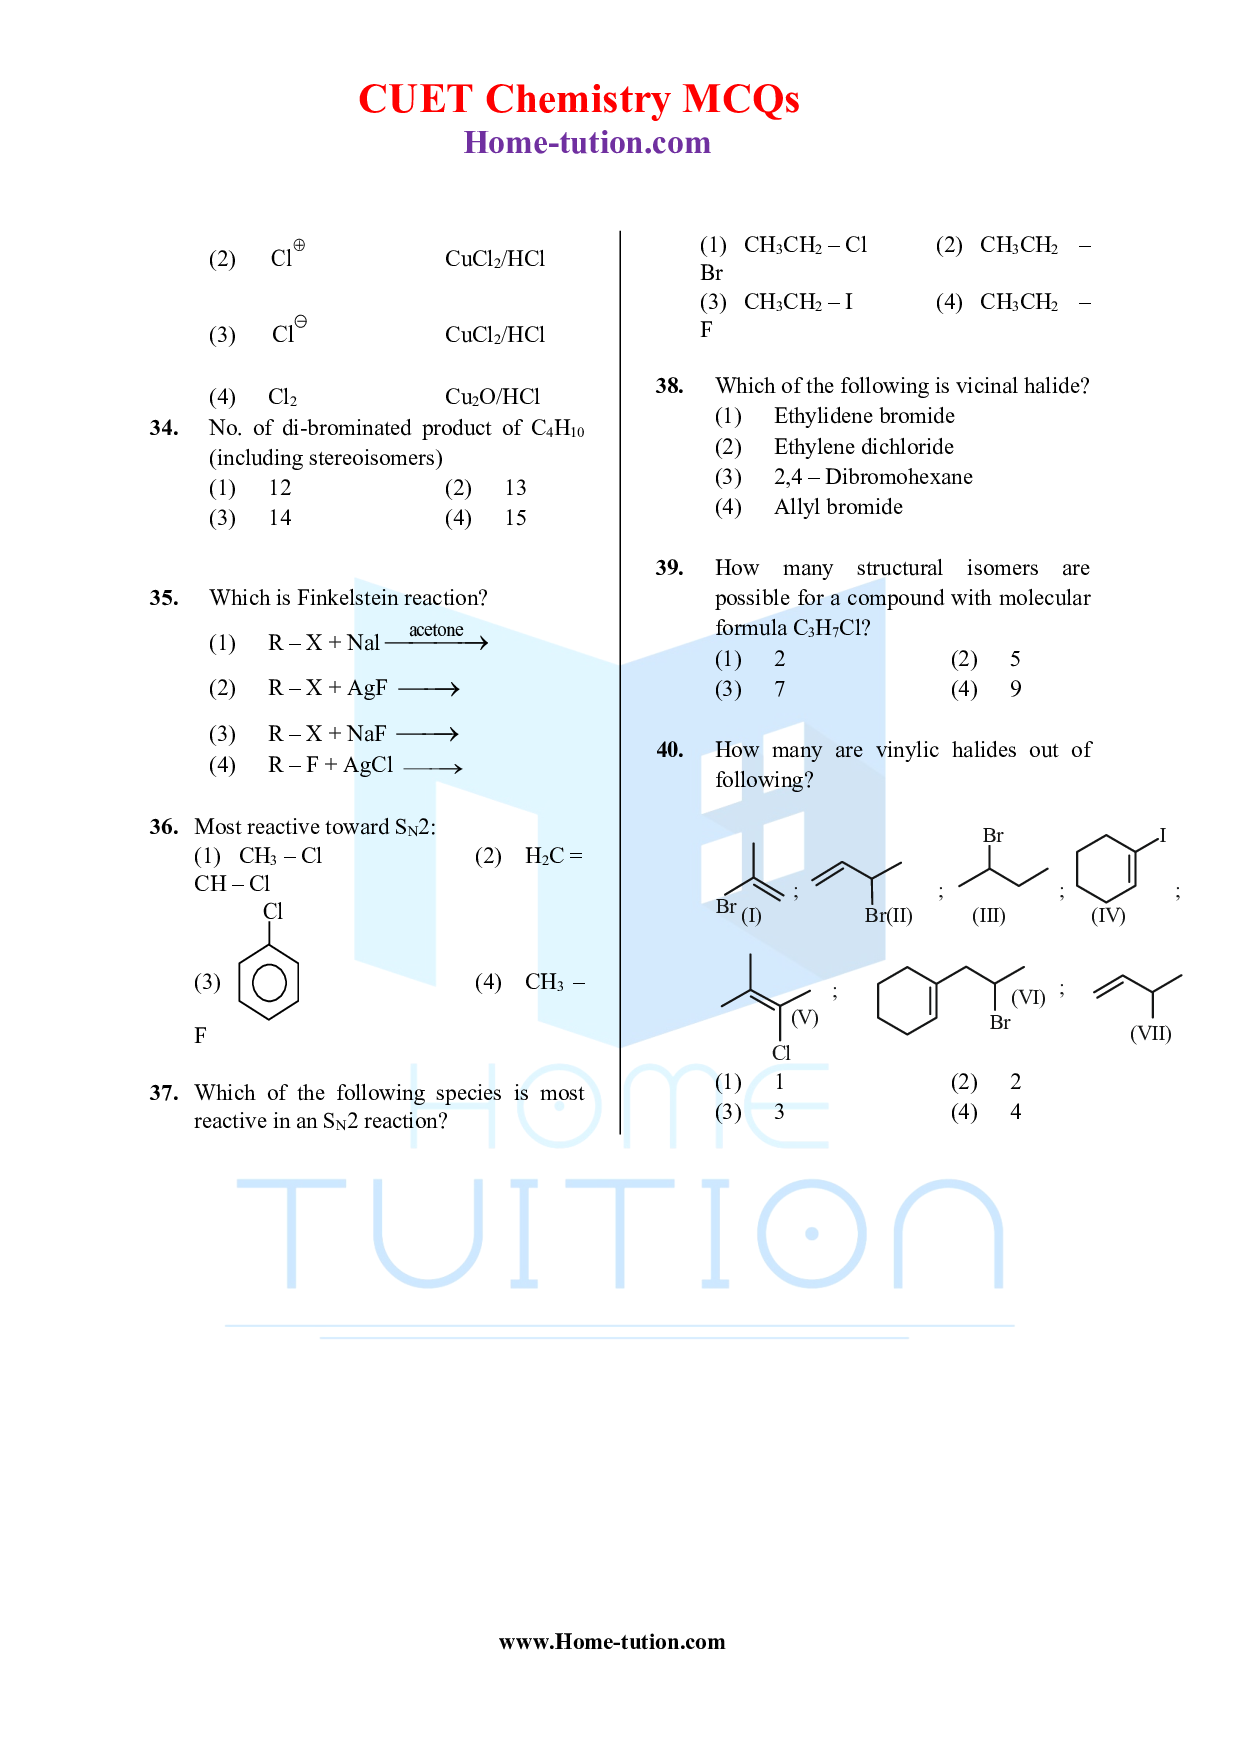 CUET MCQ Questions For Chapter-10 Haloalkenes